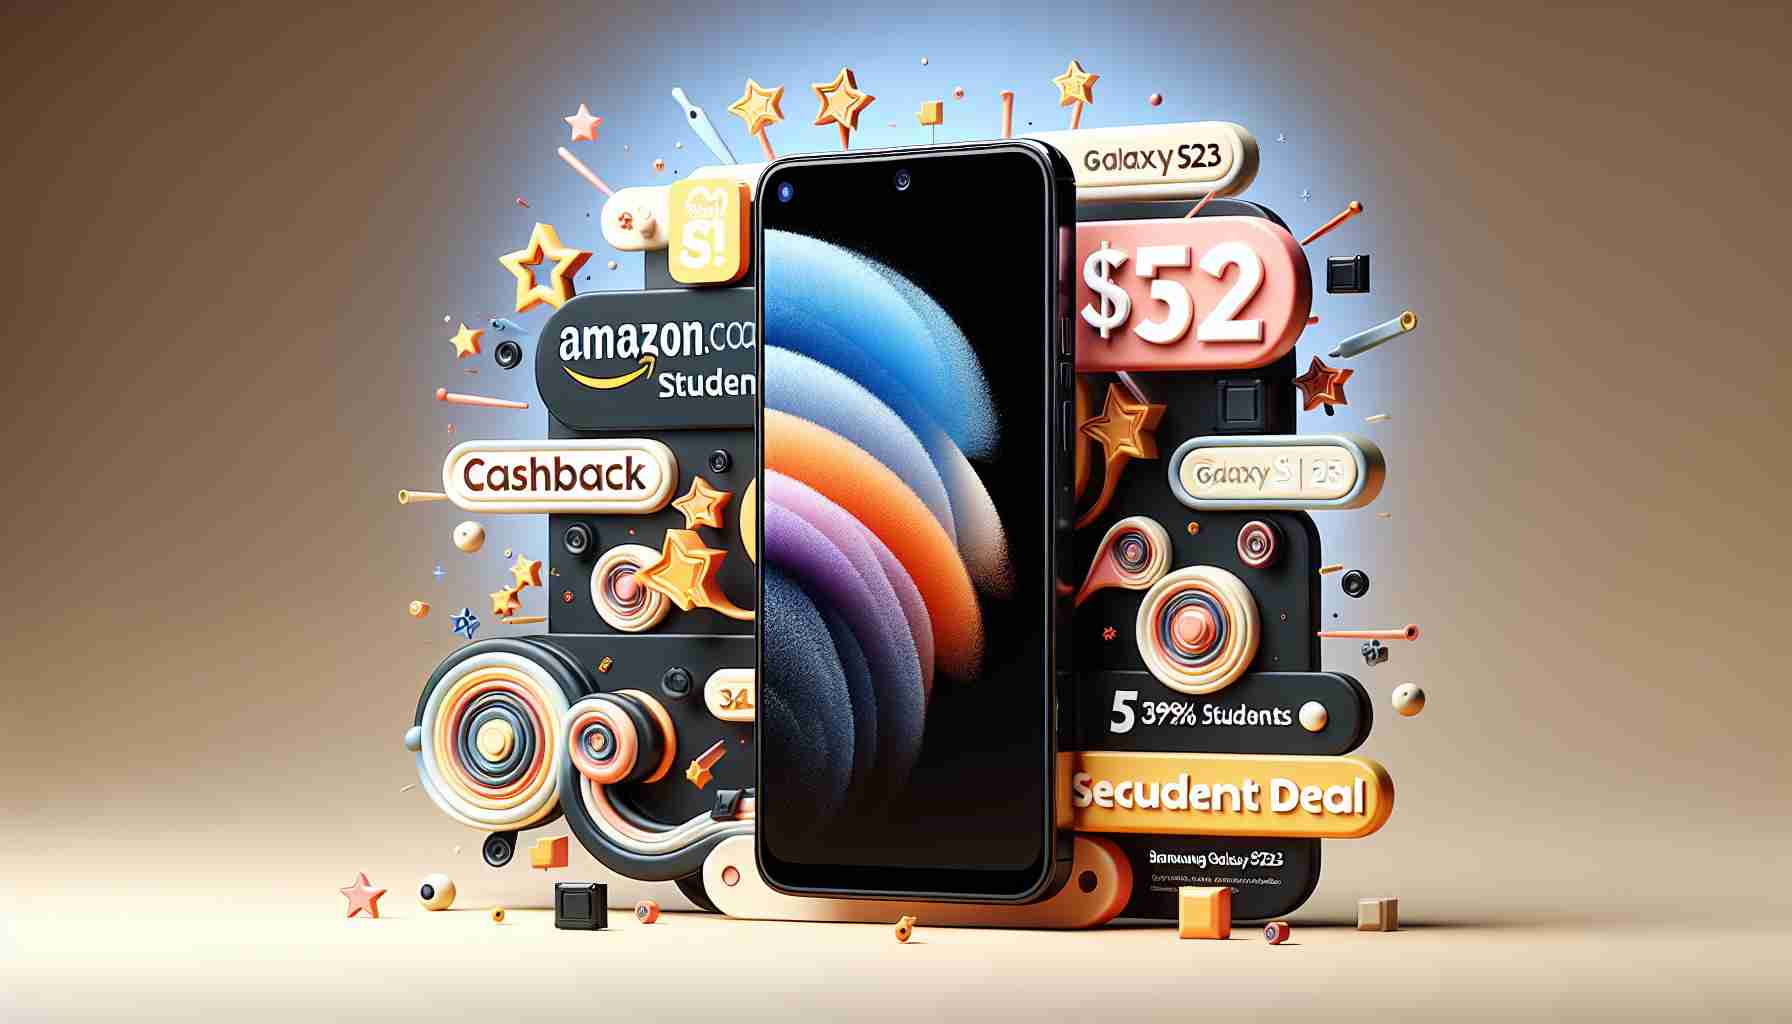 Exceptional Deals on Samsung Galaxy S23 with Amazon Cashback and Prime Student Discounts